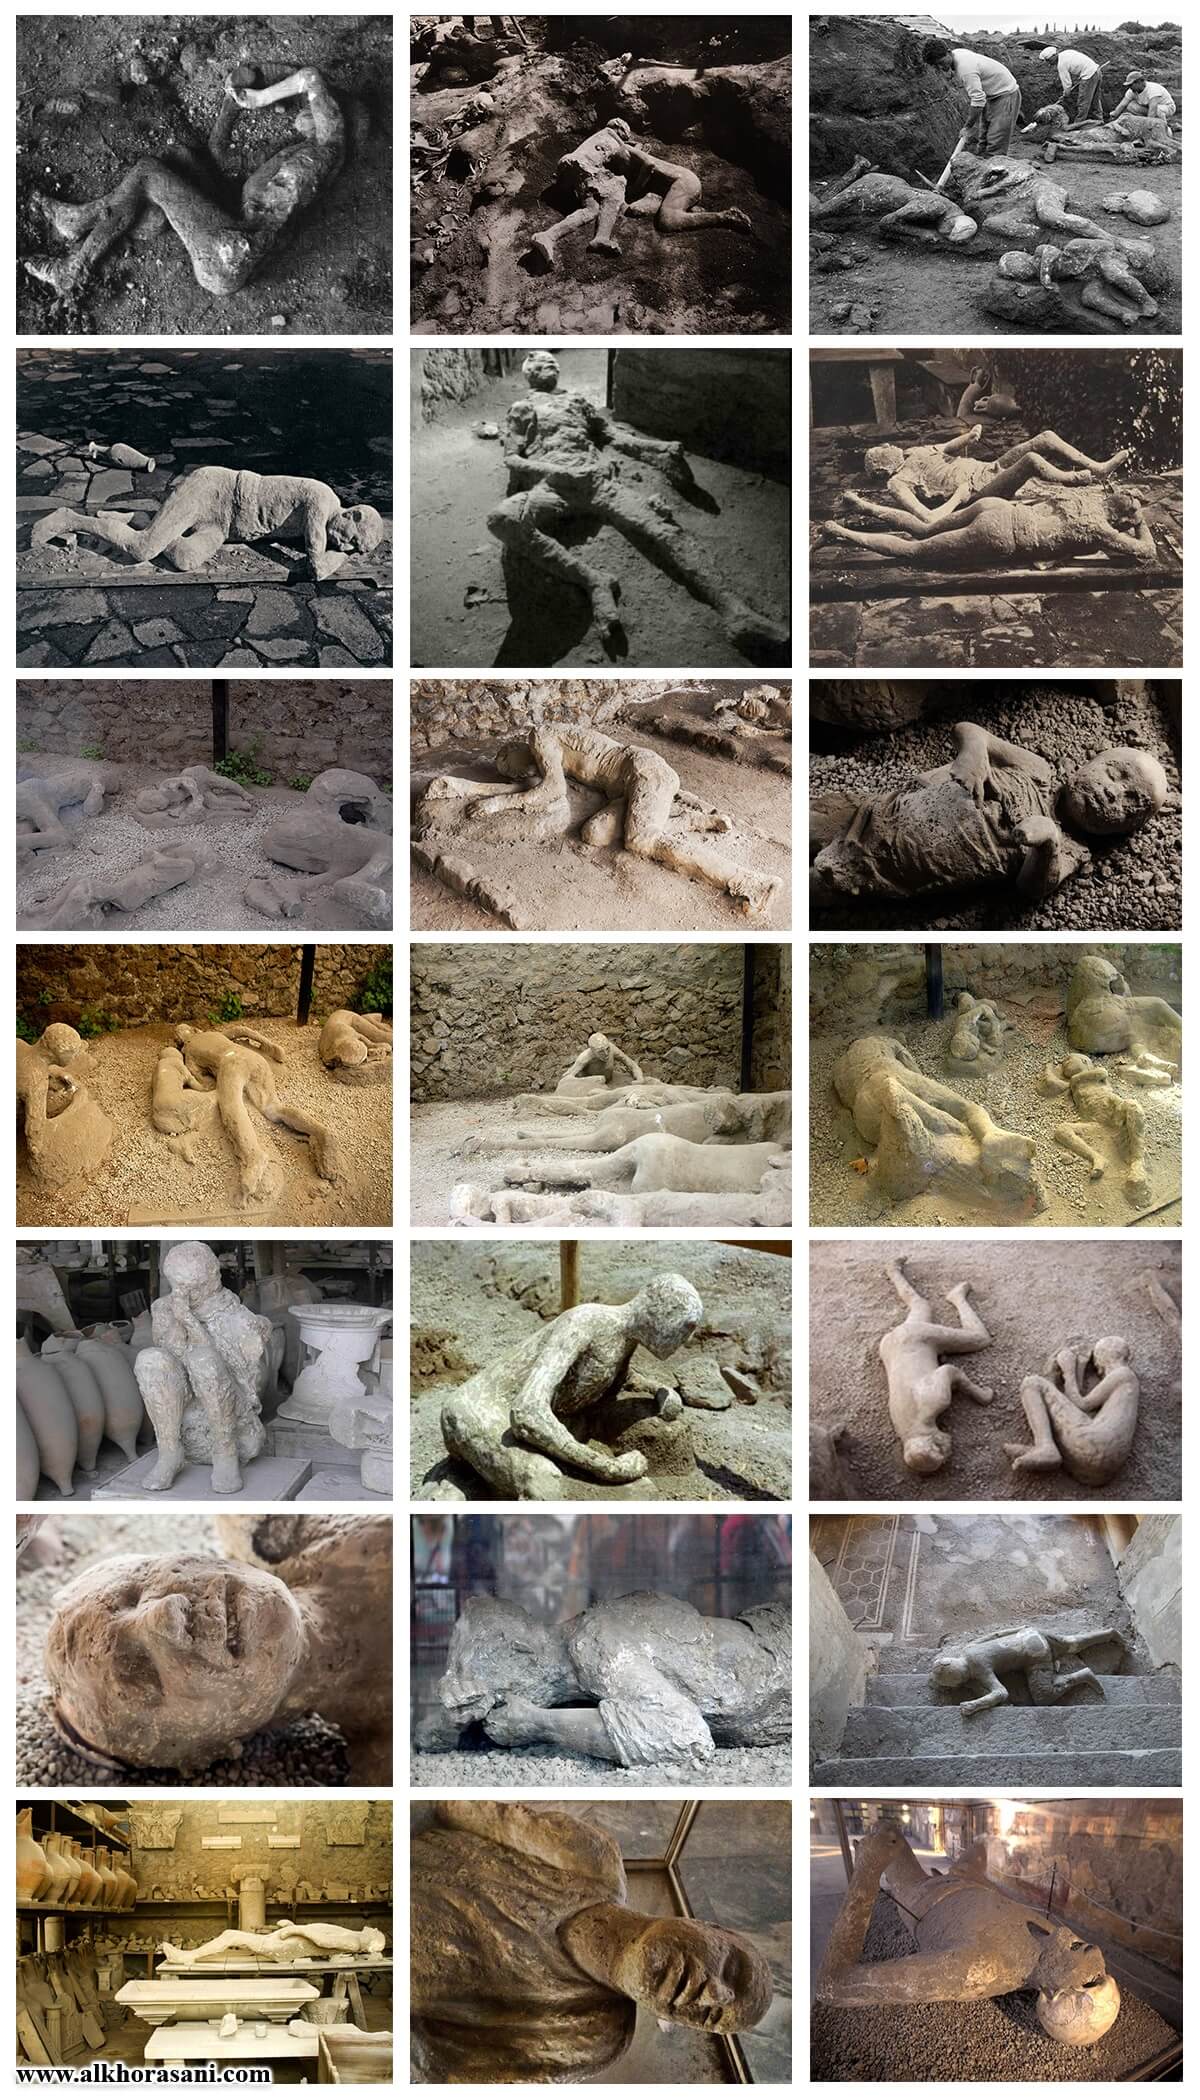 Remained bodies of people of Pompeii